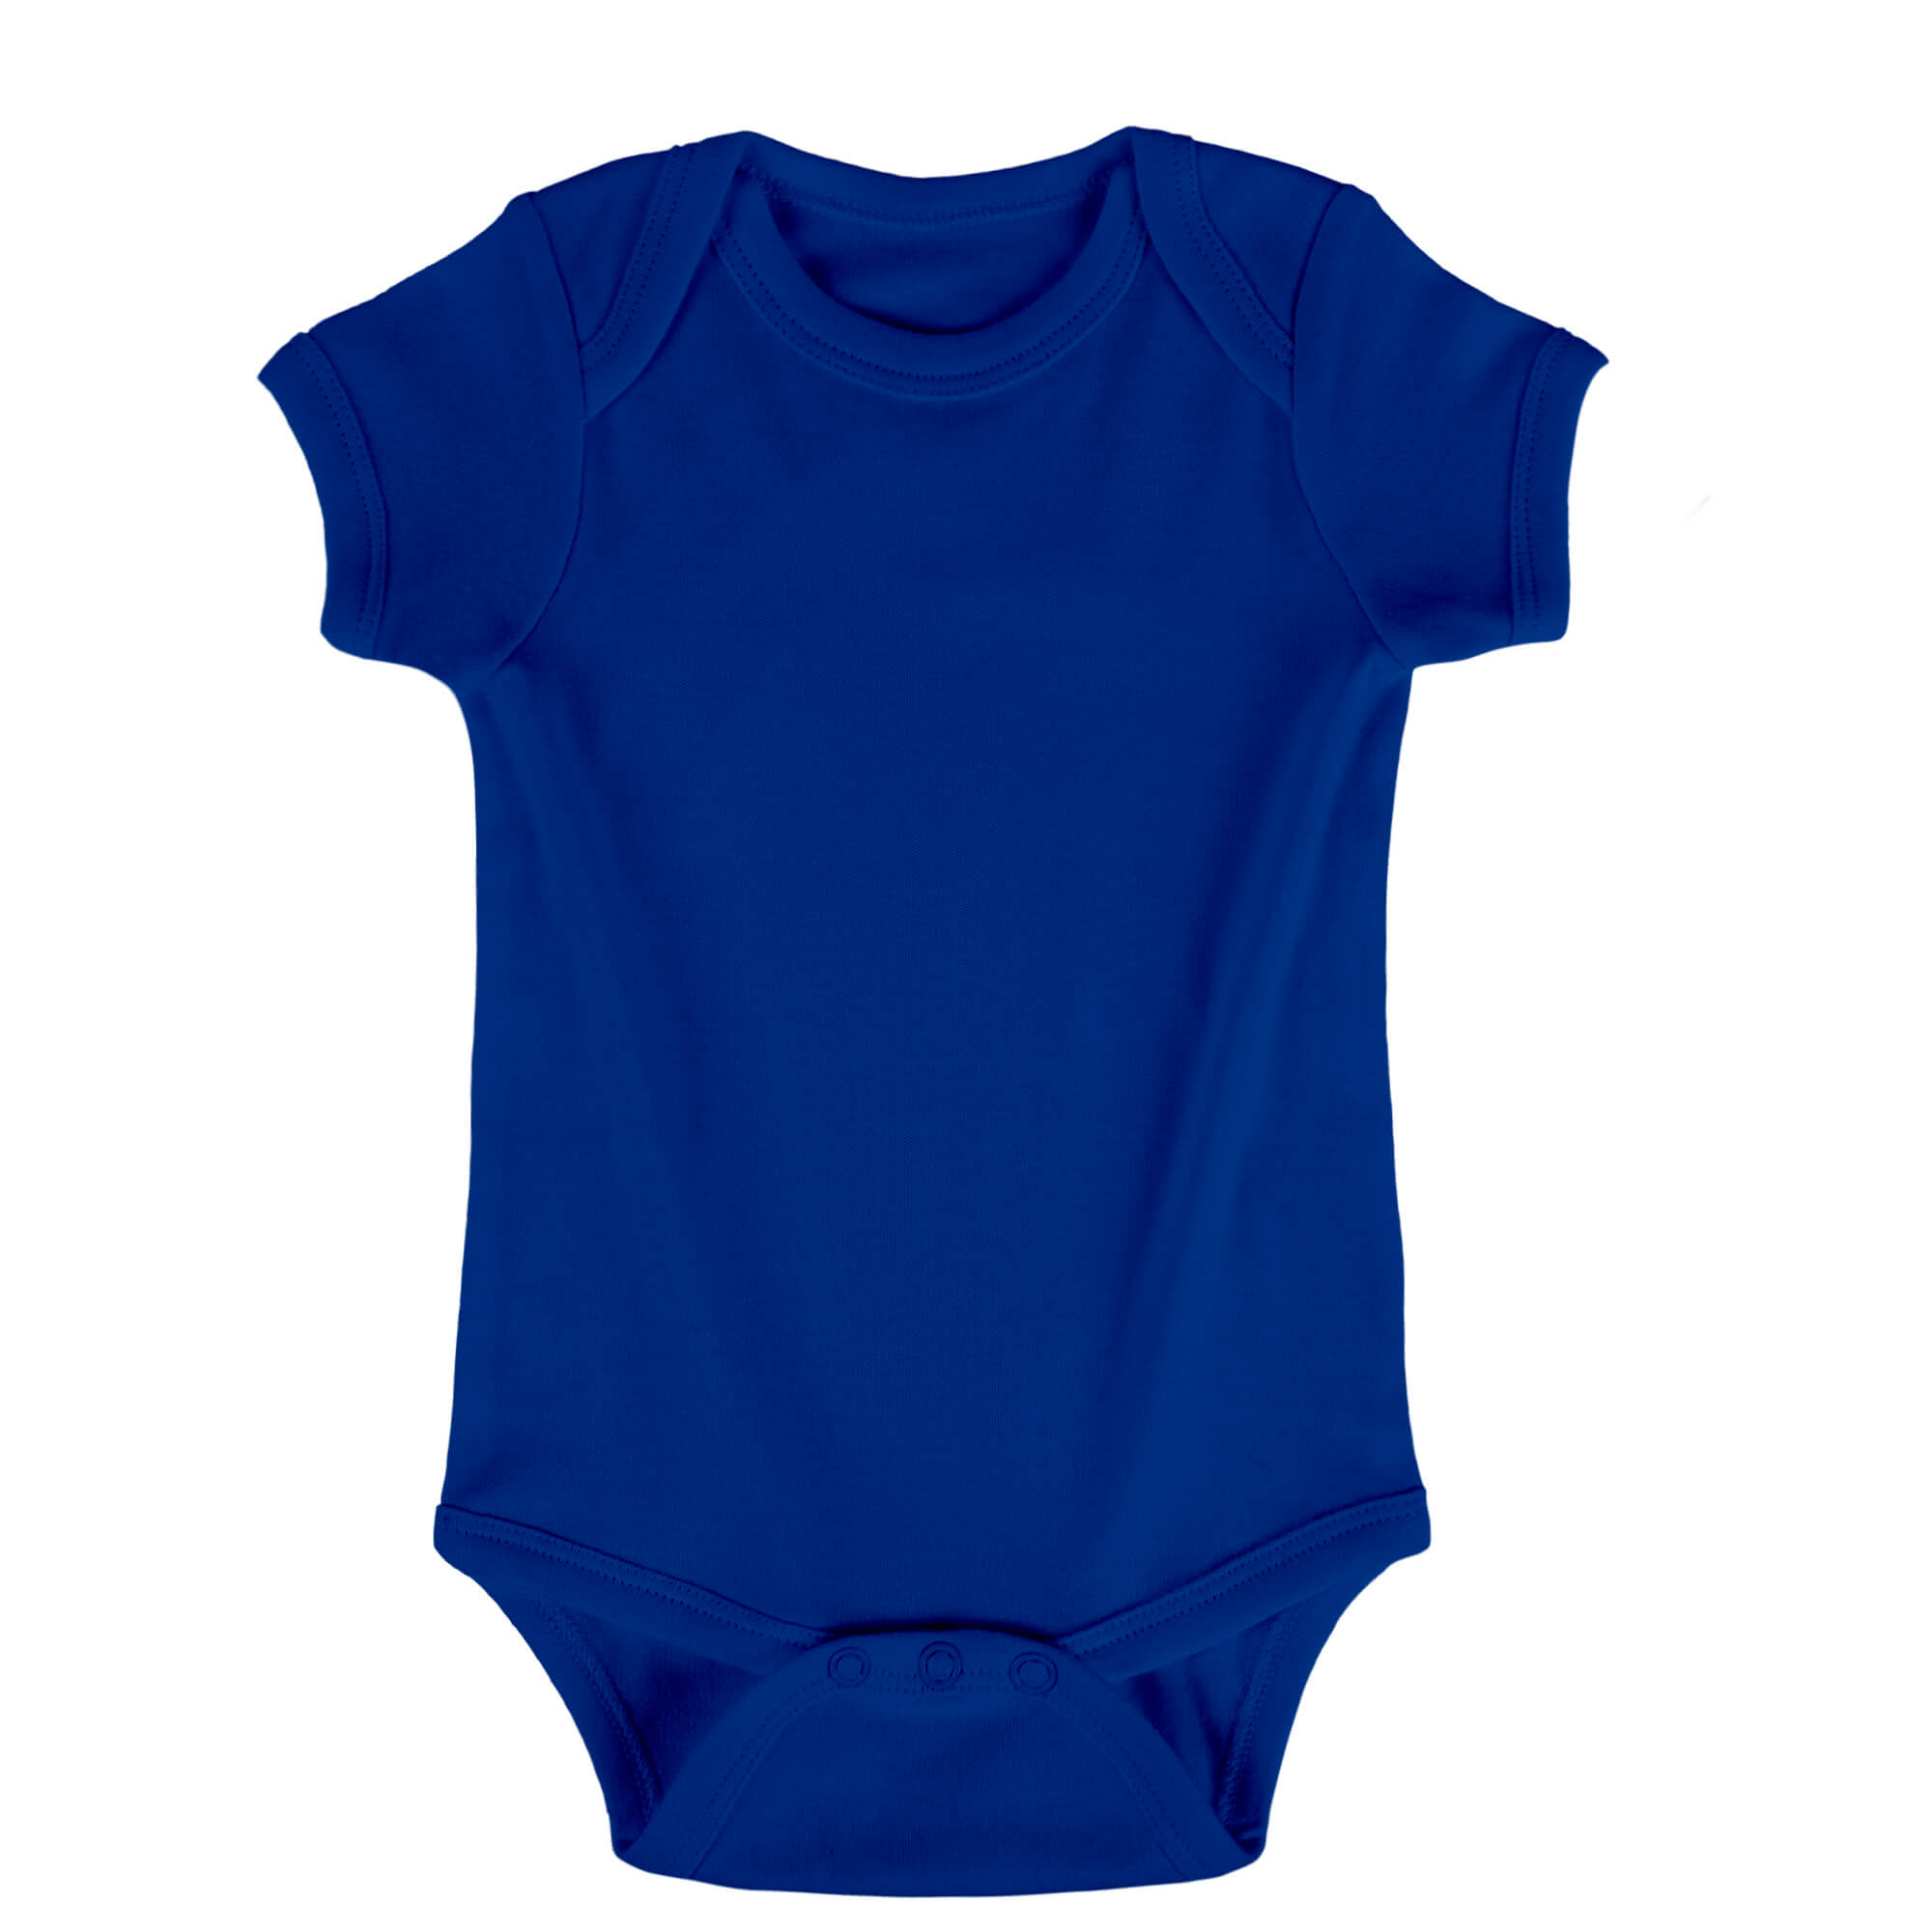 dark blue color number #43, onesie color selection, and color display.